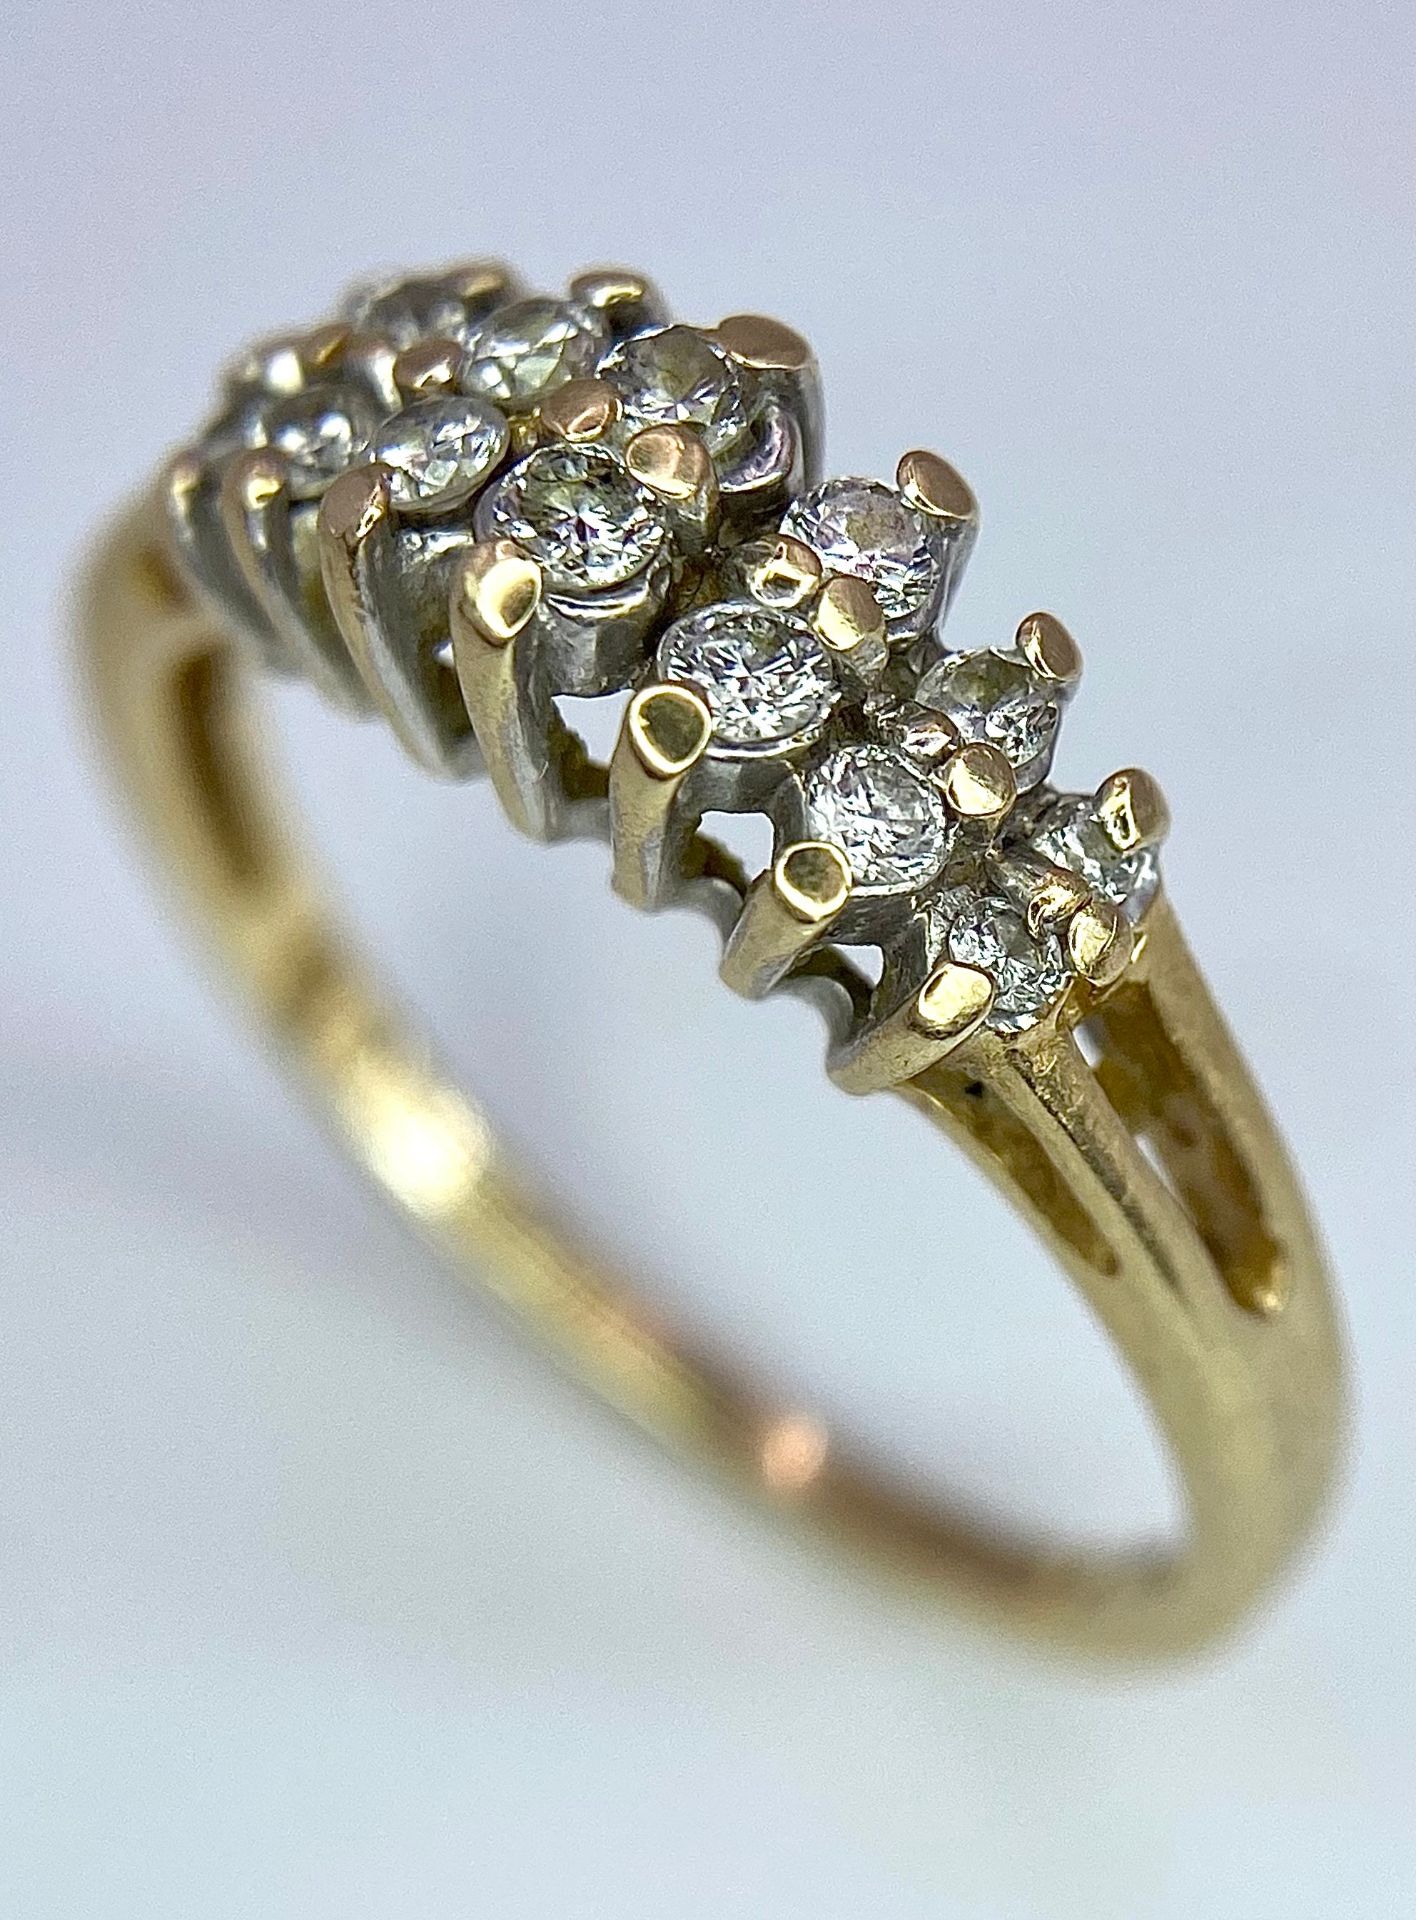 A 14K YELLOW GOLD 2 ROW DIAMOND RING. 0.25ctw, size N, 2.3g total weight. Ref: SC 9029 - Image 3 of 7